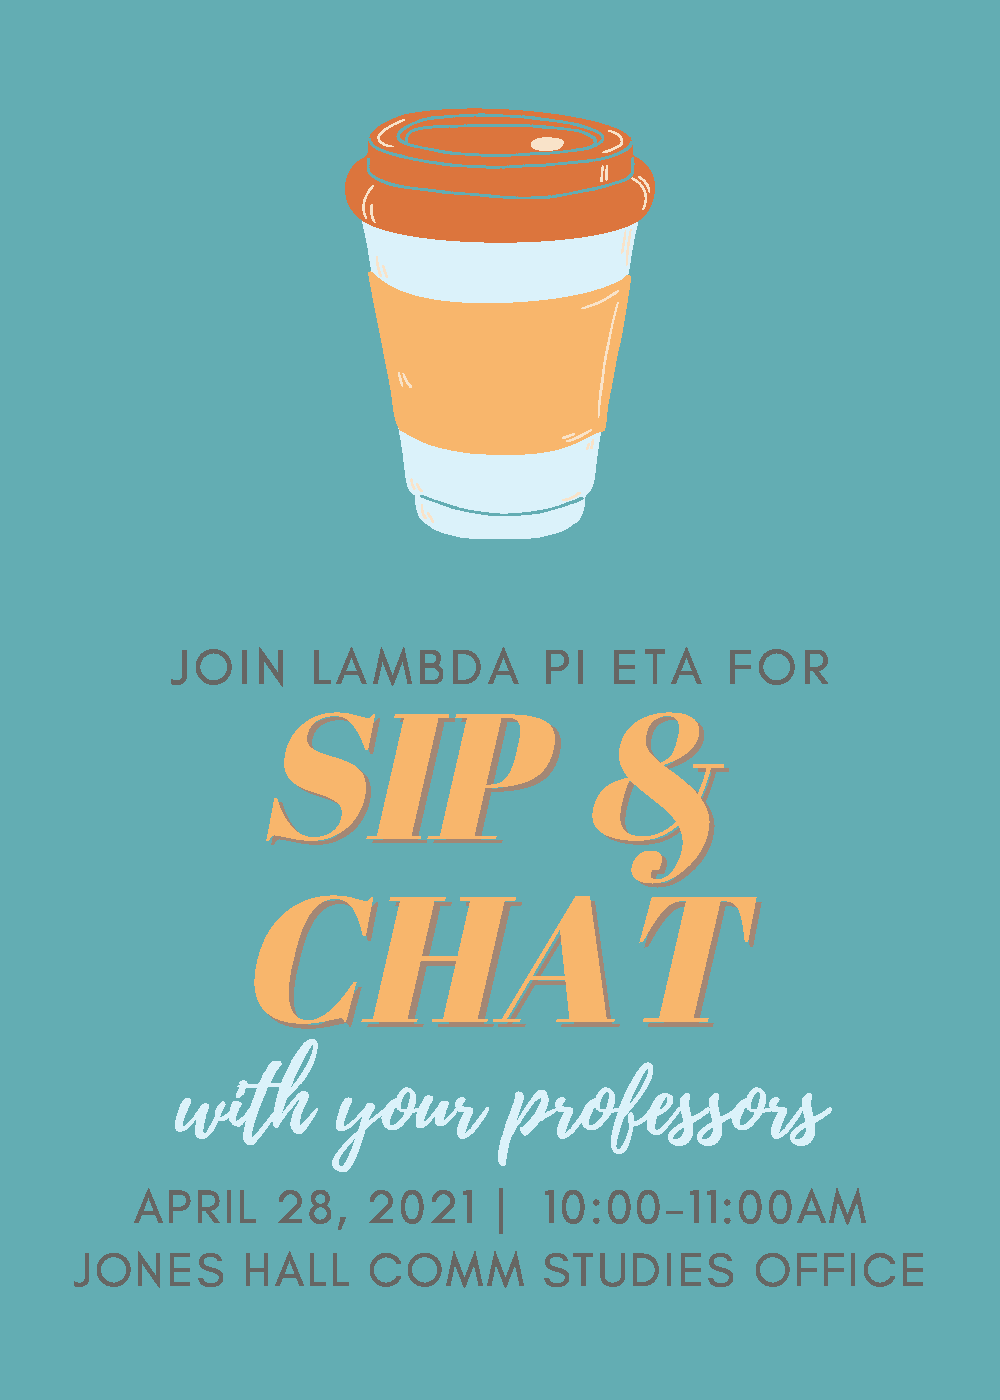 Sip Coffee and Chat with professors on April 28 from 10-11 AM outside the Comm Studies Deparment Office in Jones Hall. RSVP to Suzi.Richardson@mtsu.edu by Monday April 26 